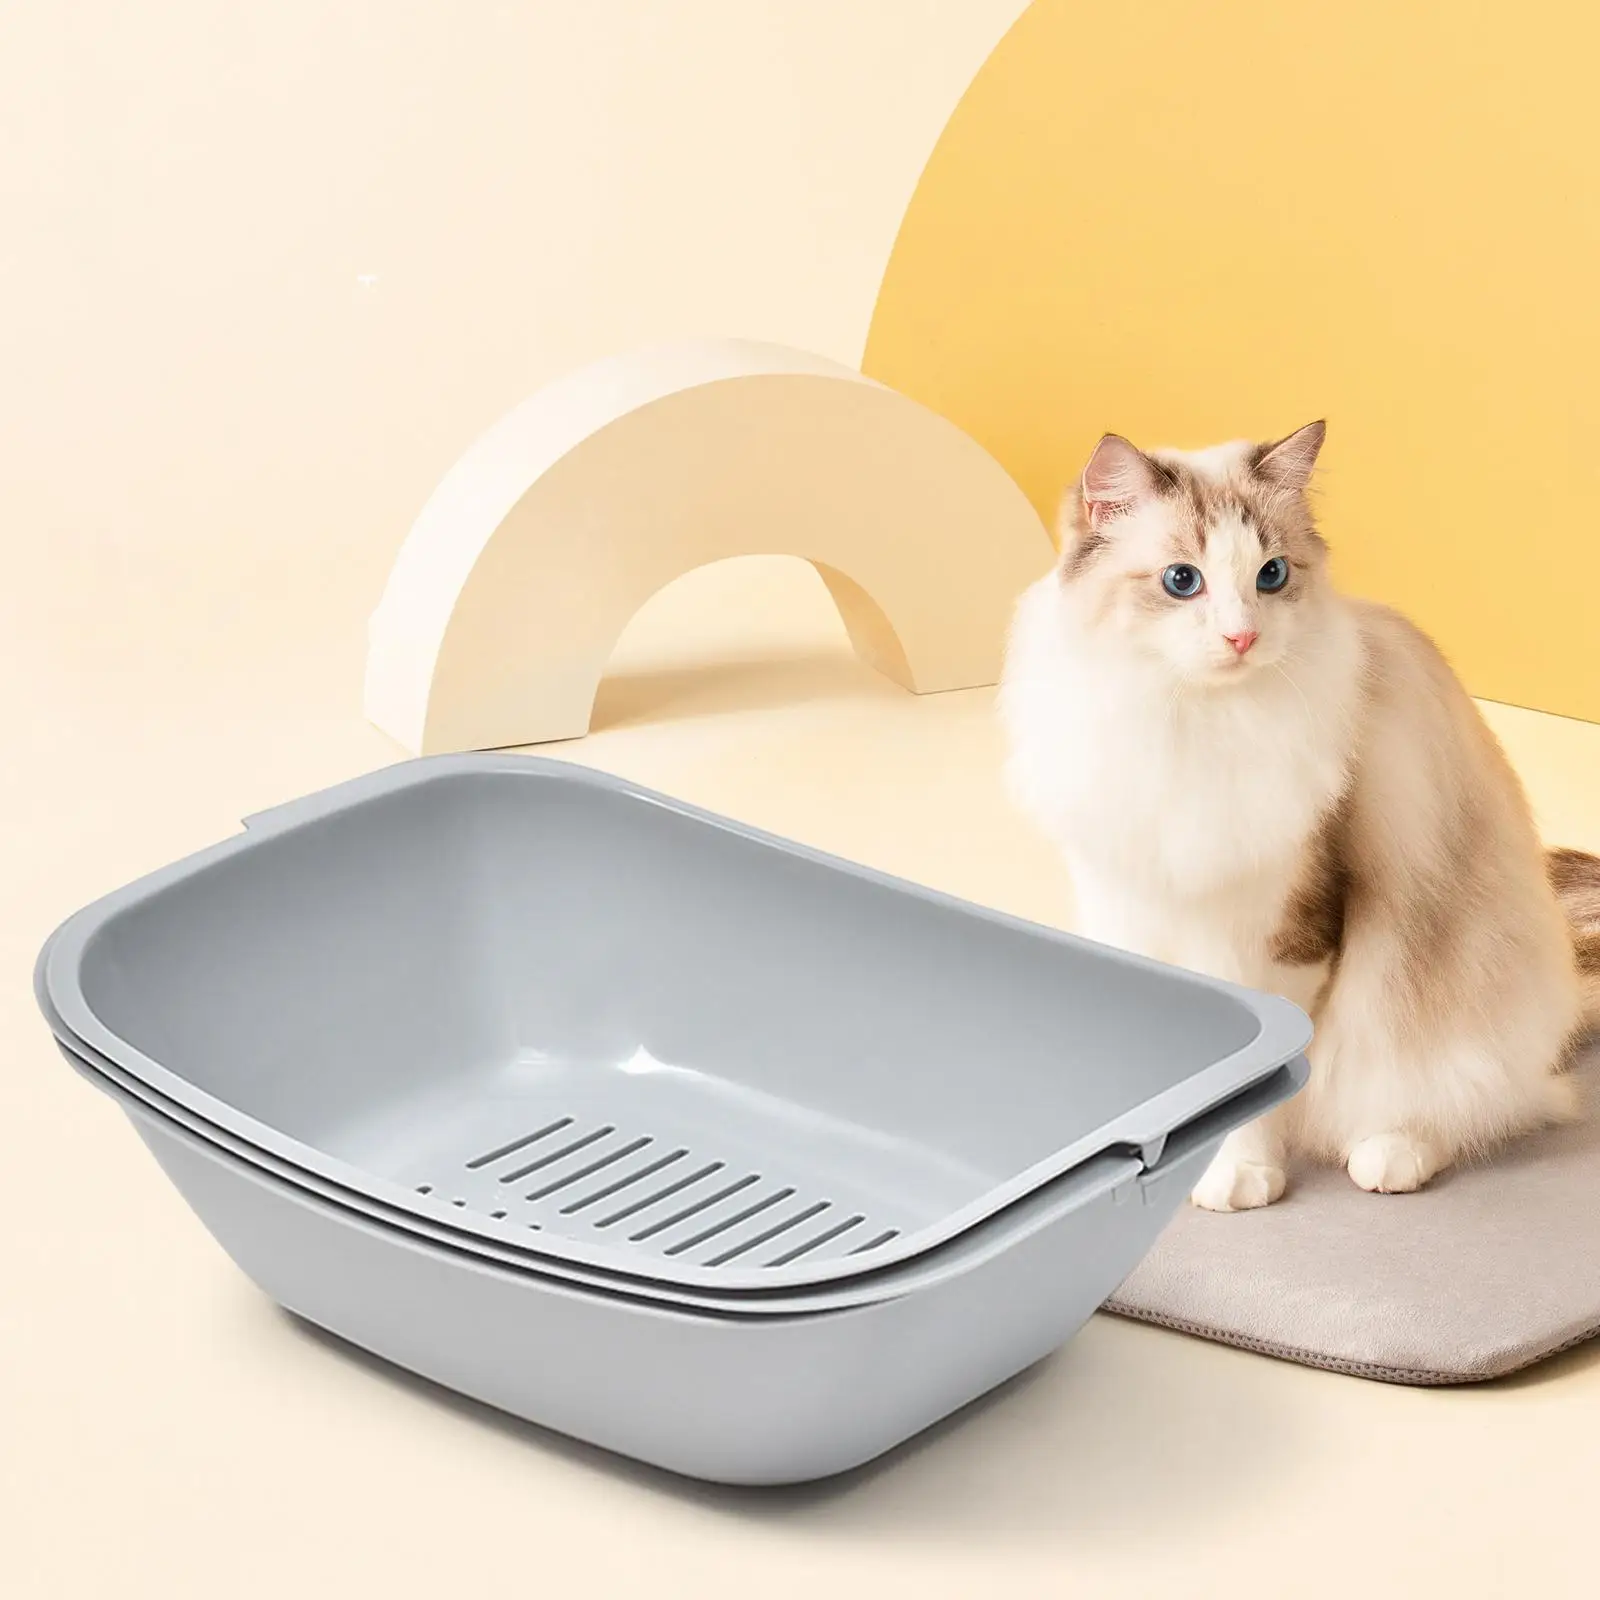 Open Top Cats Litter Box Easy to Clean Durable for Indoor Cats Anti Splashing Large Capacity Supplies Cat Litter Container